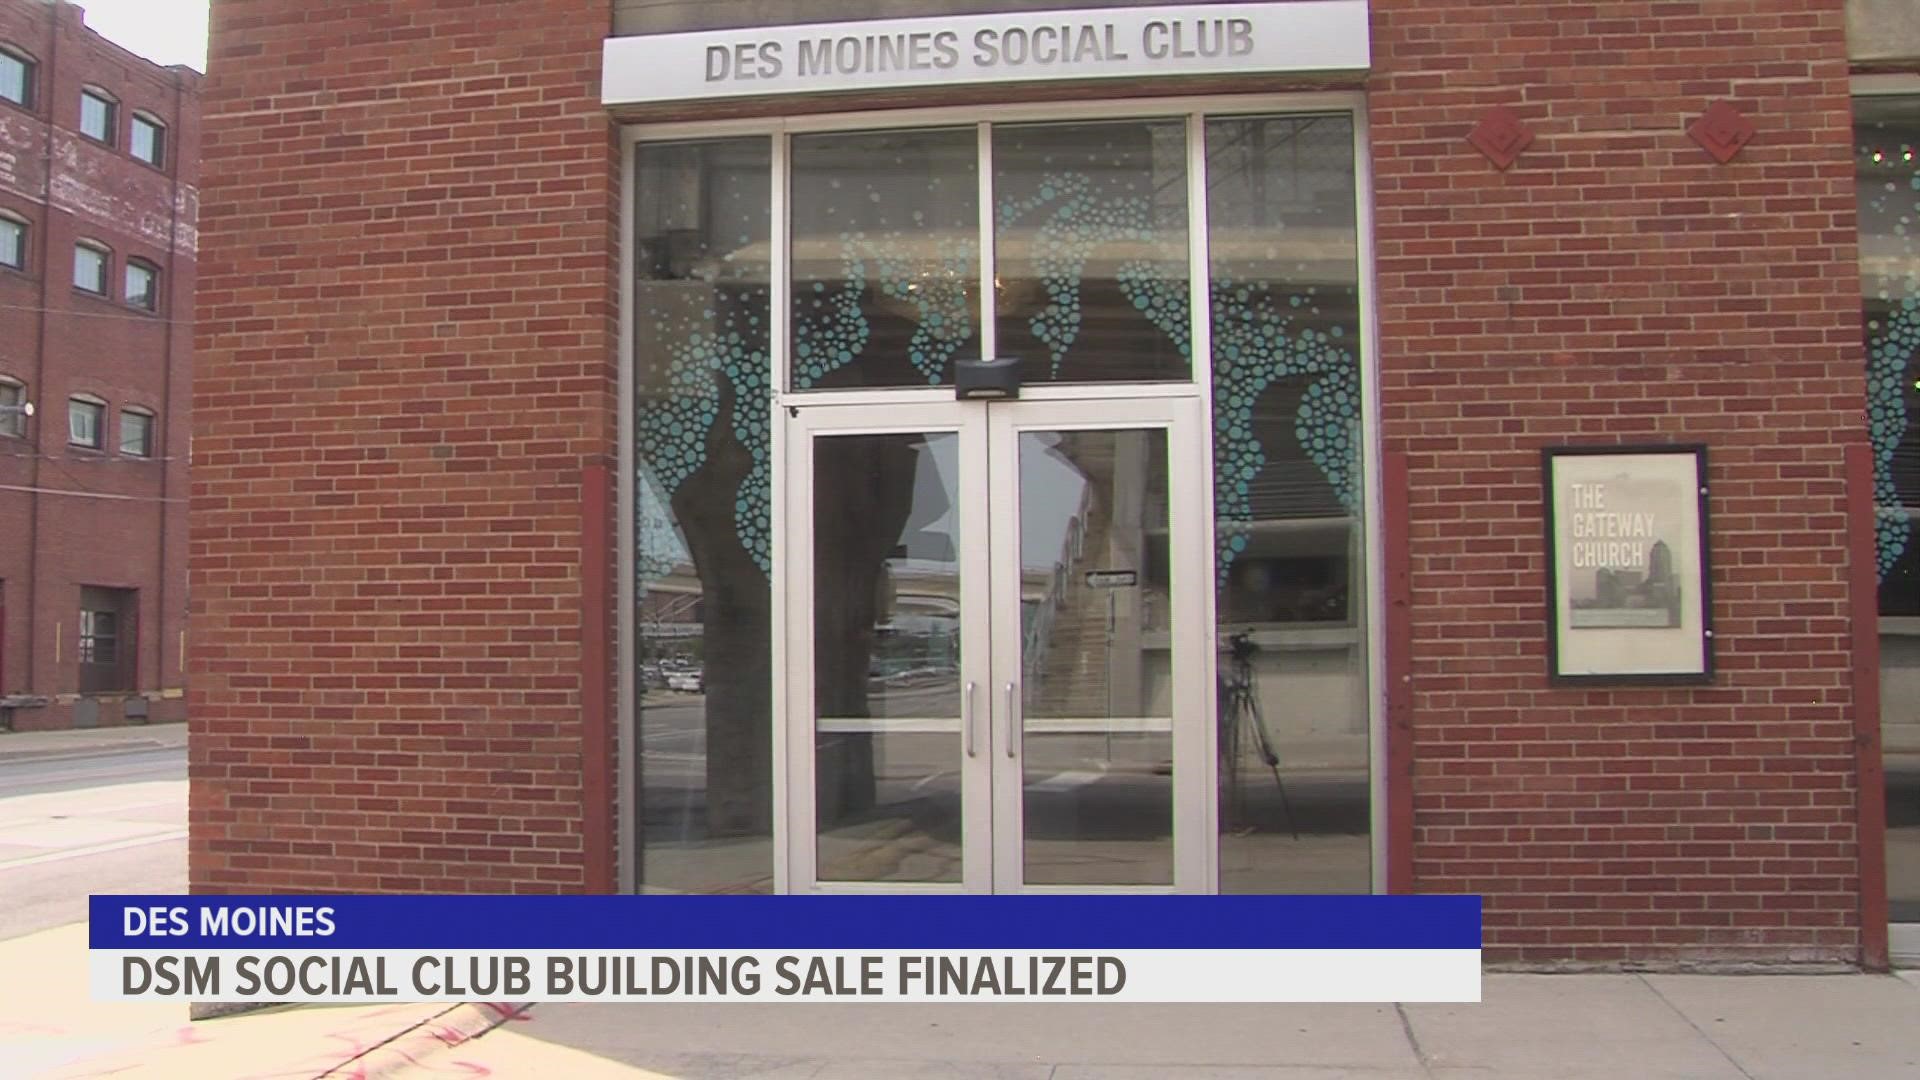 The Des Moines City Council approved the sale during Monday's meeting.